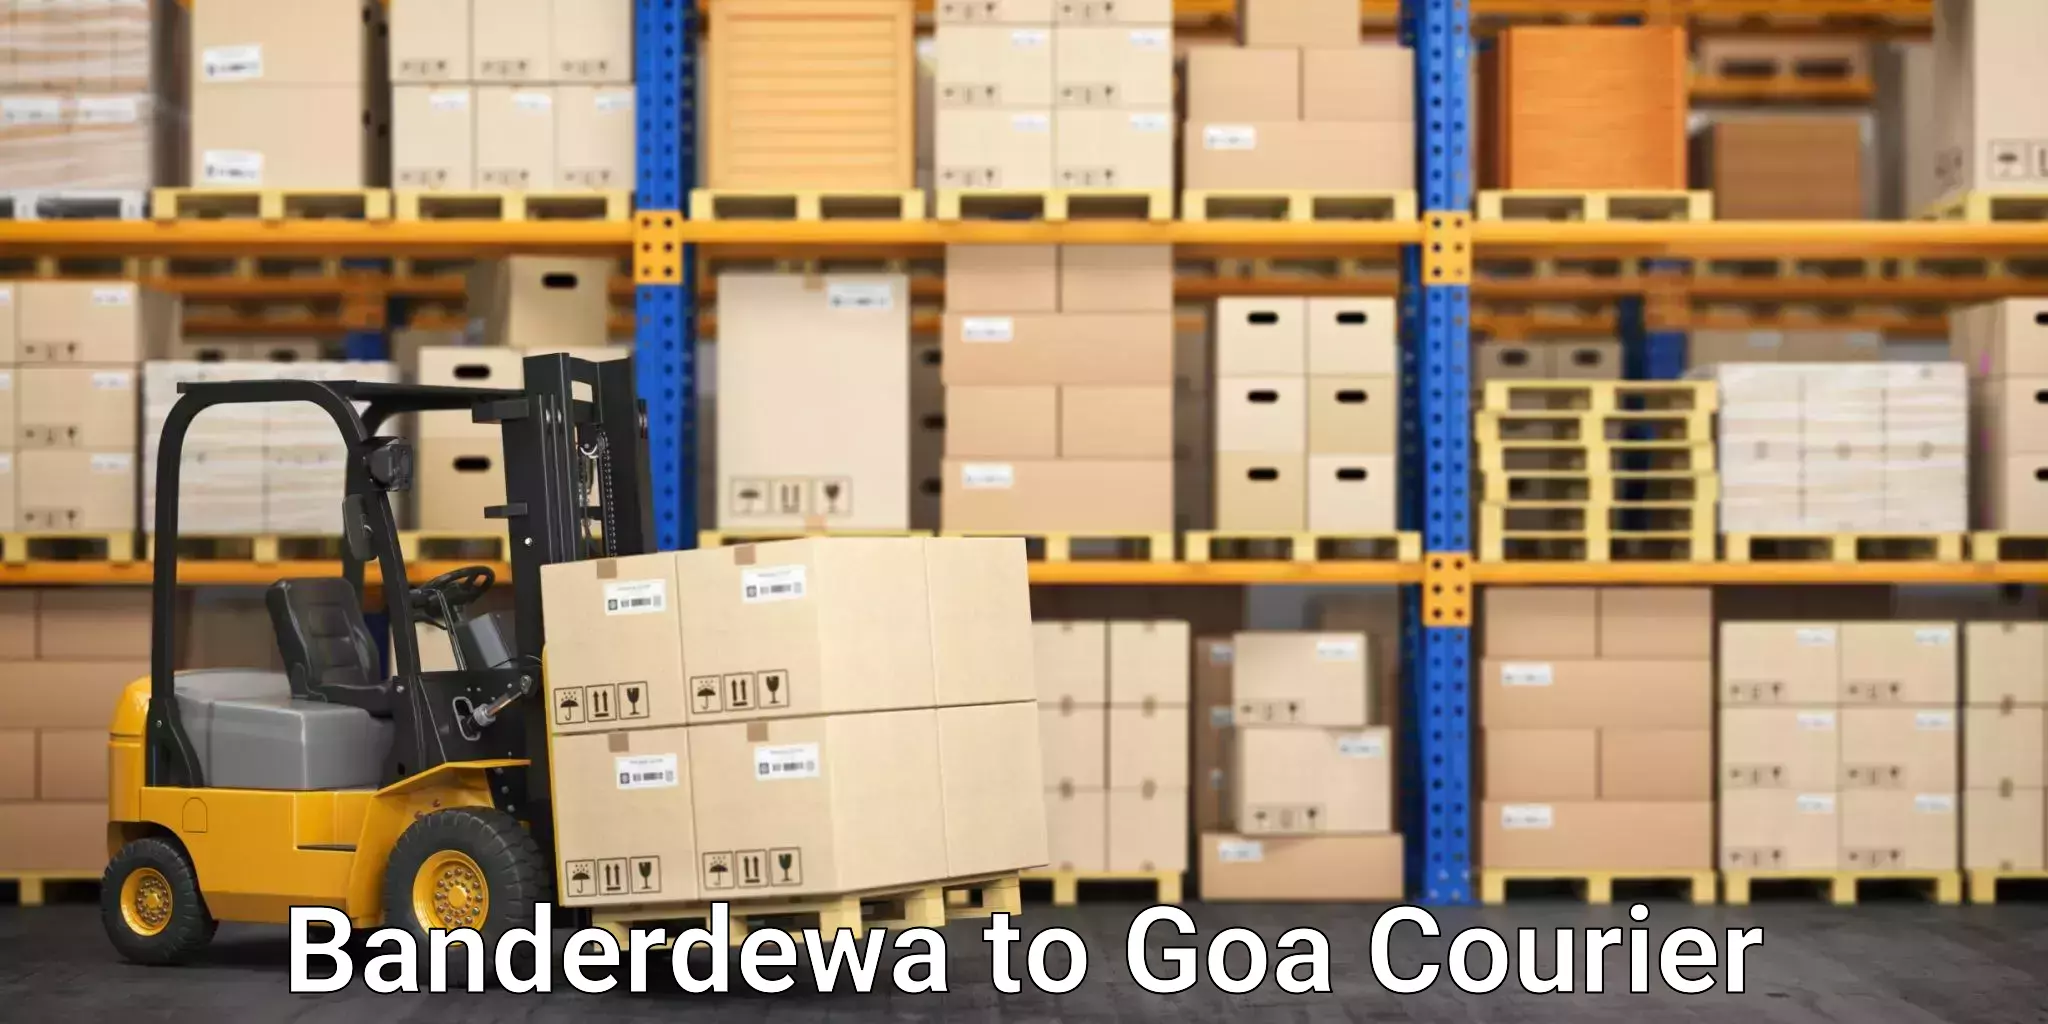 Easy access courier services Banderdewa to Goa University